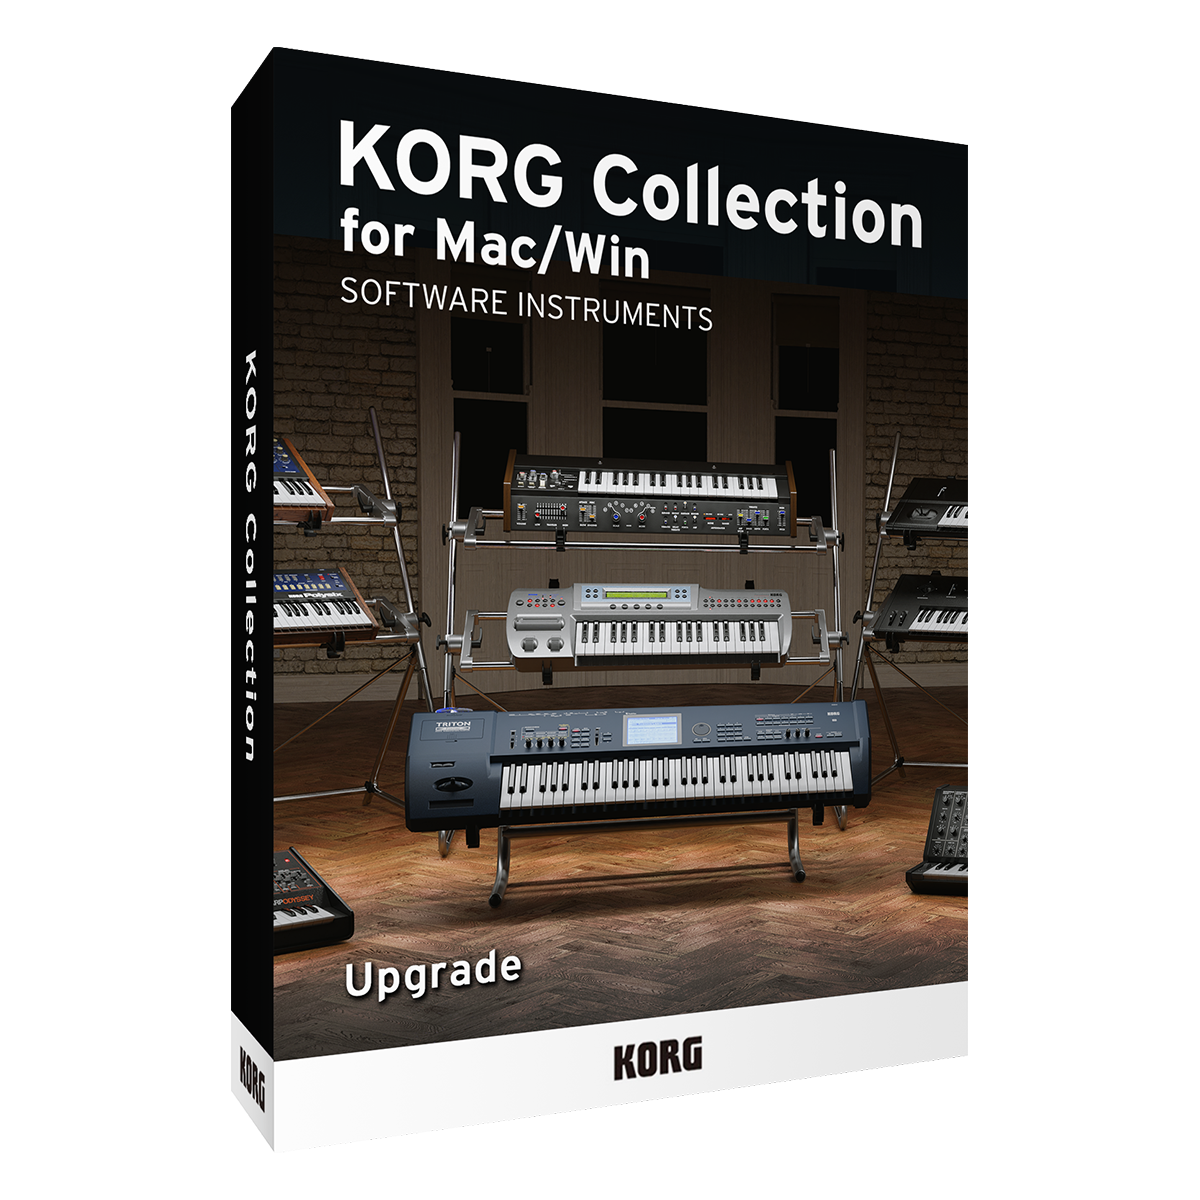 Korg Synthesizers (Legacy collection). Korg - Legacy collection 1. Korg Legacy collection 2022. Korg Legacy collection 3. Korg collection